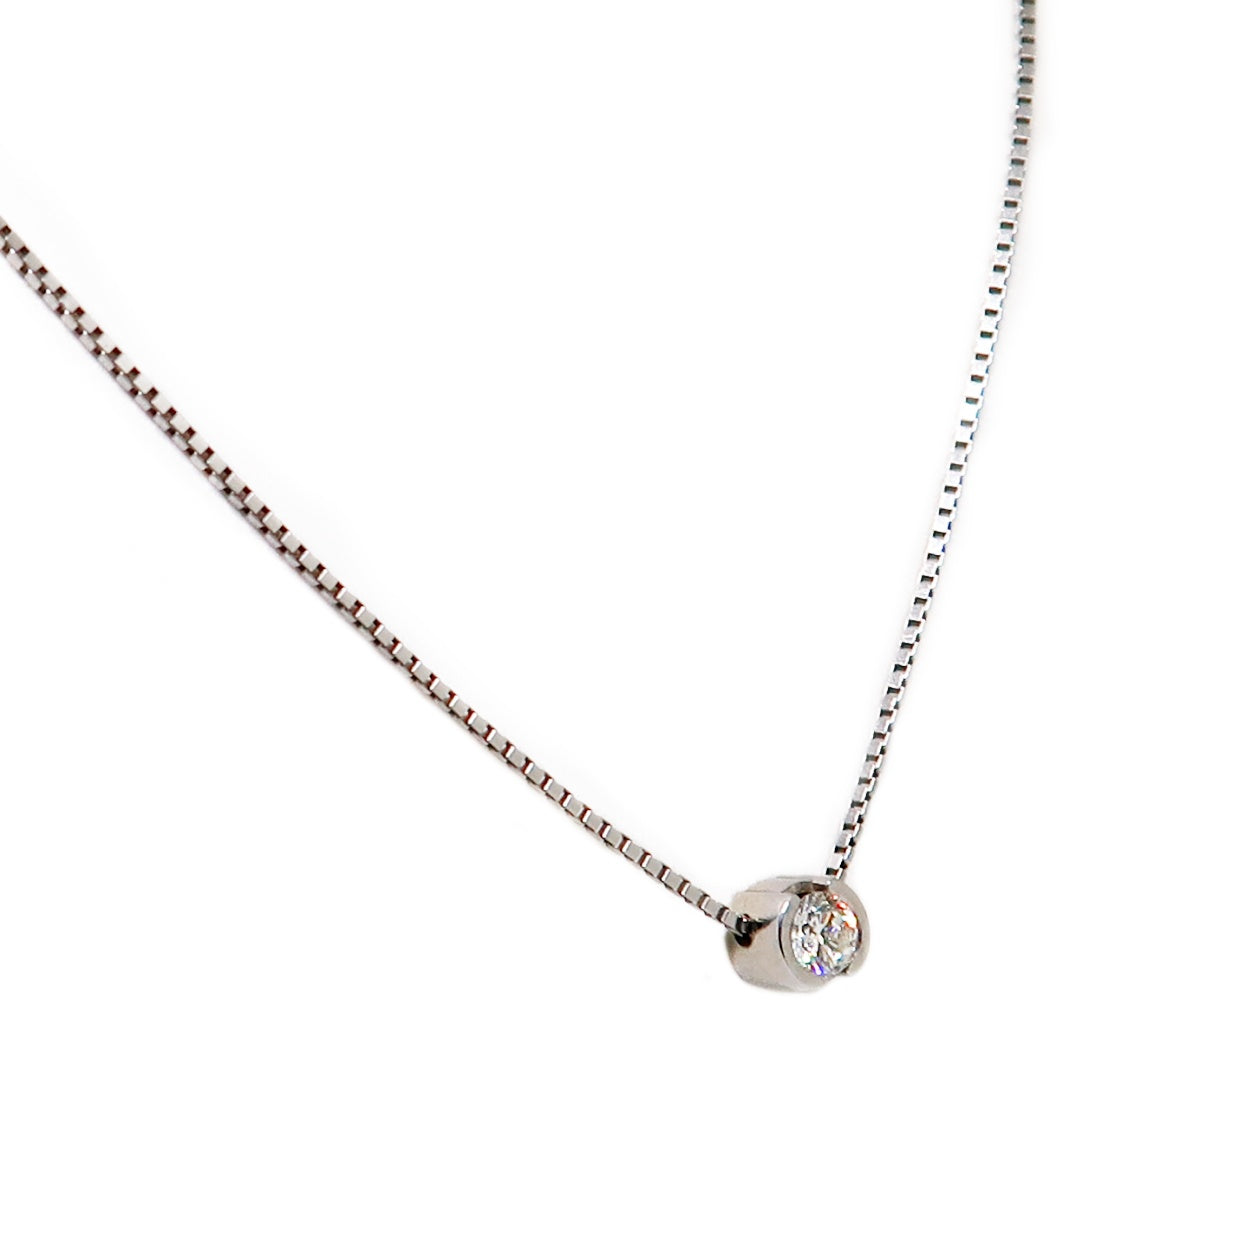 Graceful Radiance 18Kt White Gold Solitaire Diamond Necklace - TBZ & Sons